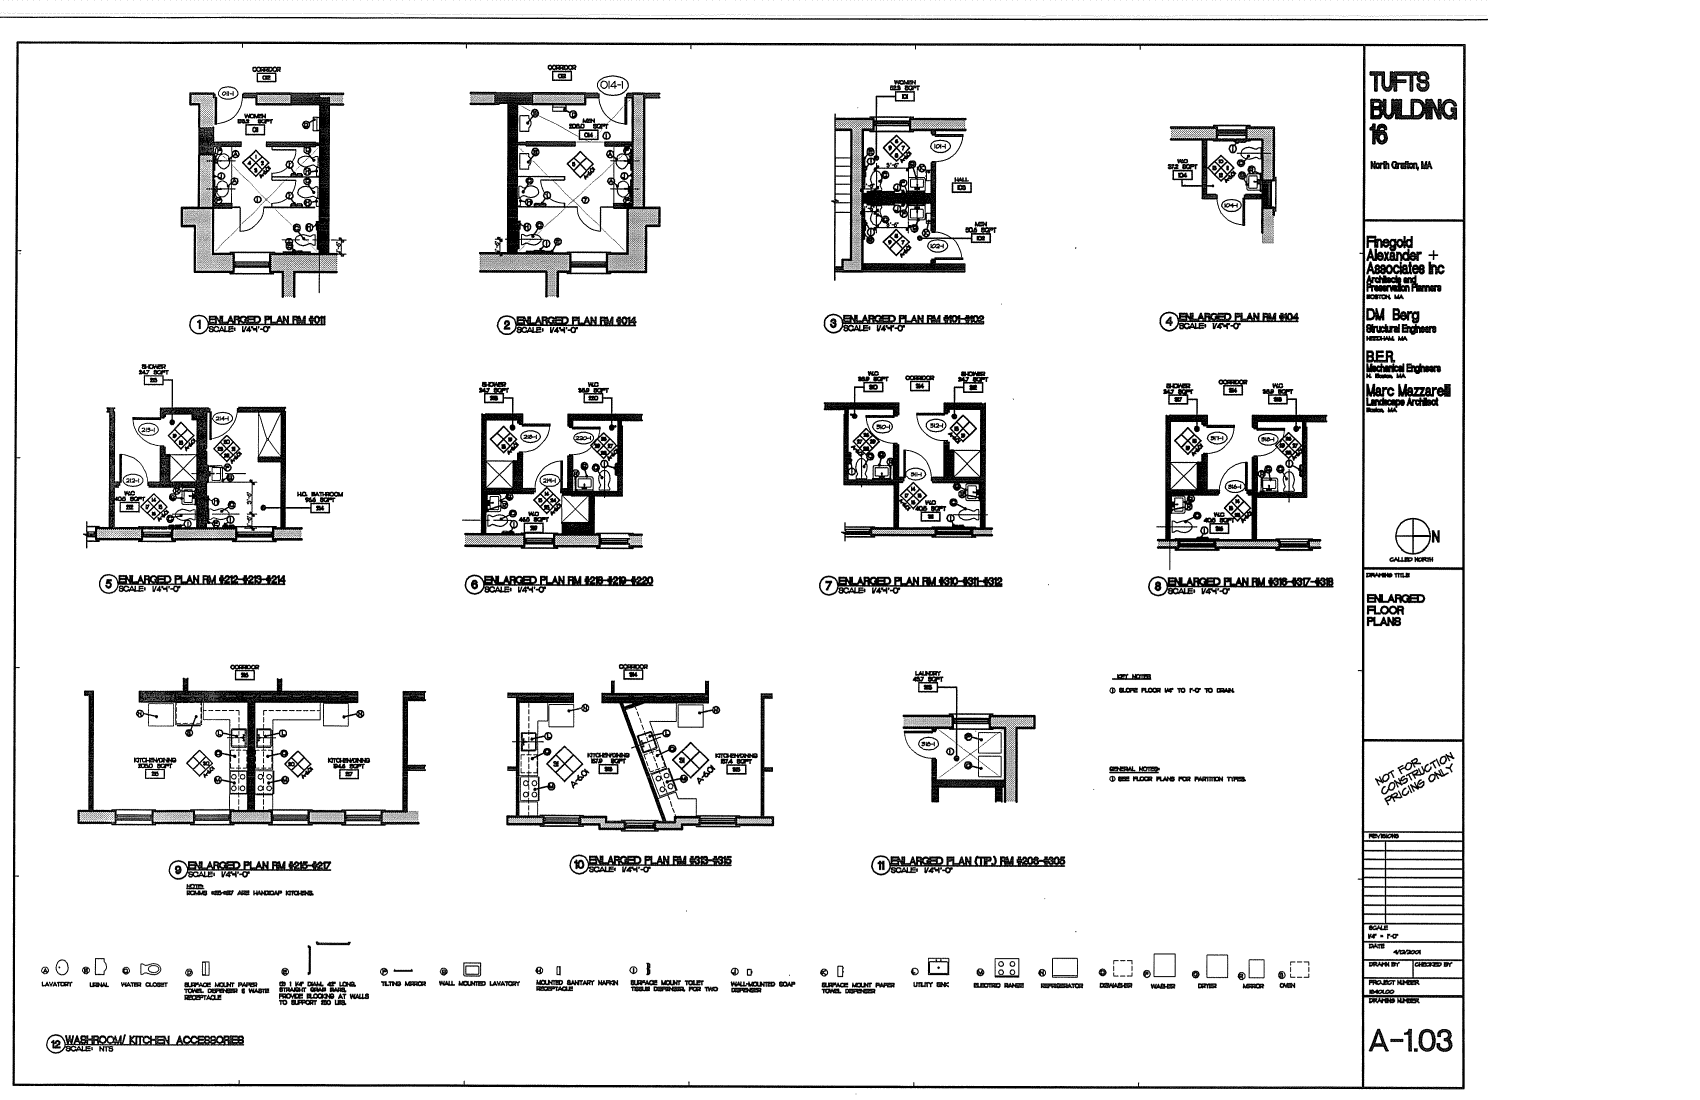 TUFTS UNIVERSITY, BUILDING 16 / A-1.03 ENLARGED FLOOR PLANS